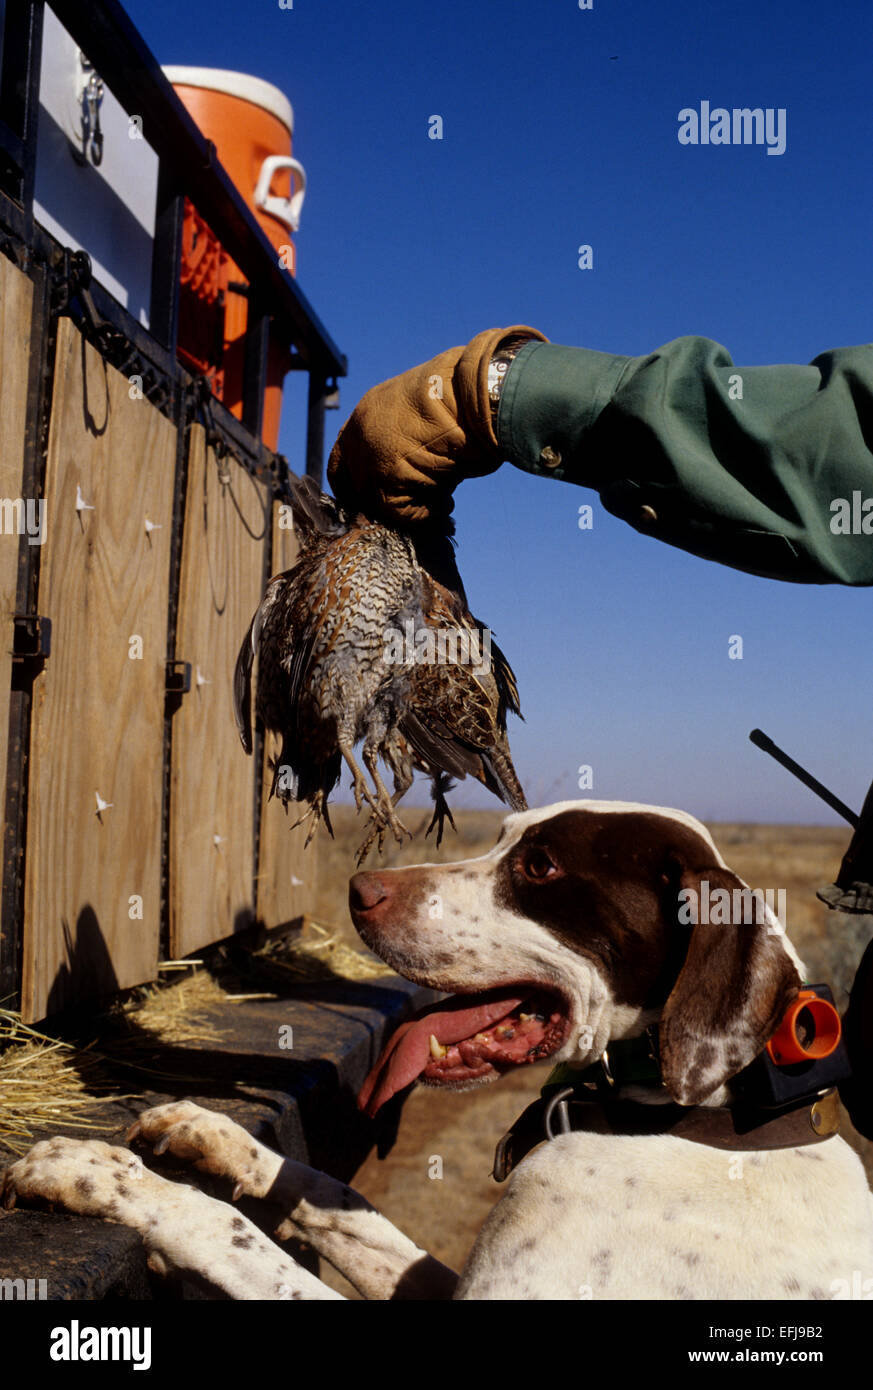 A Texas quail hunter holding Bobwhite quail (Colinus virginianus) with his dog while hunting on a ranch Stock Photo